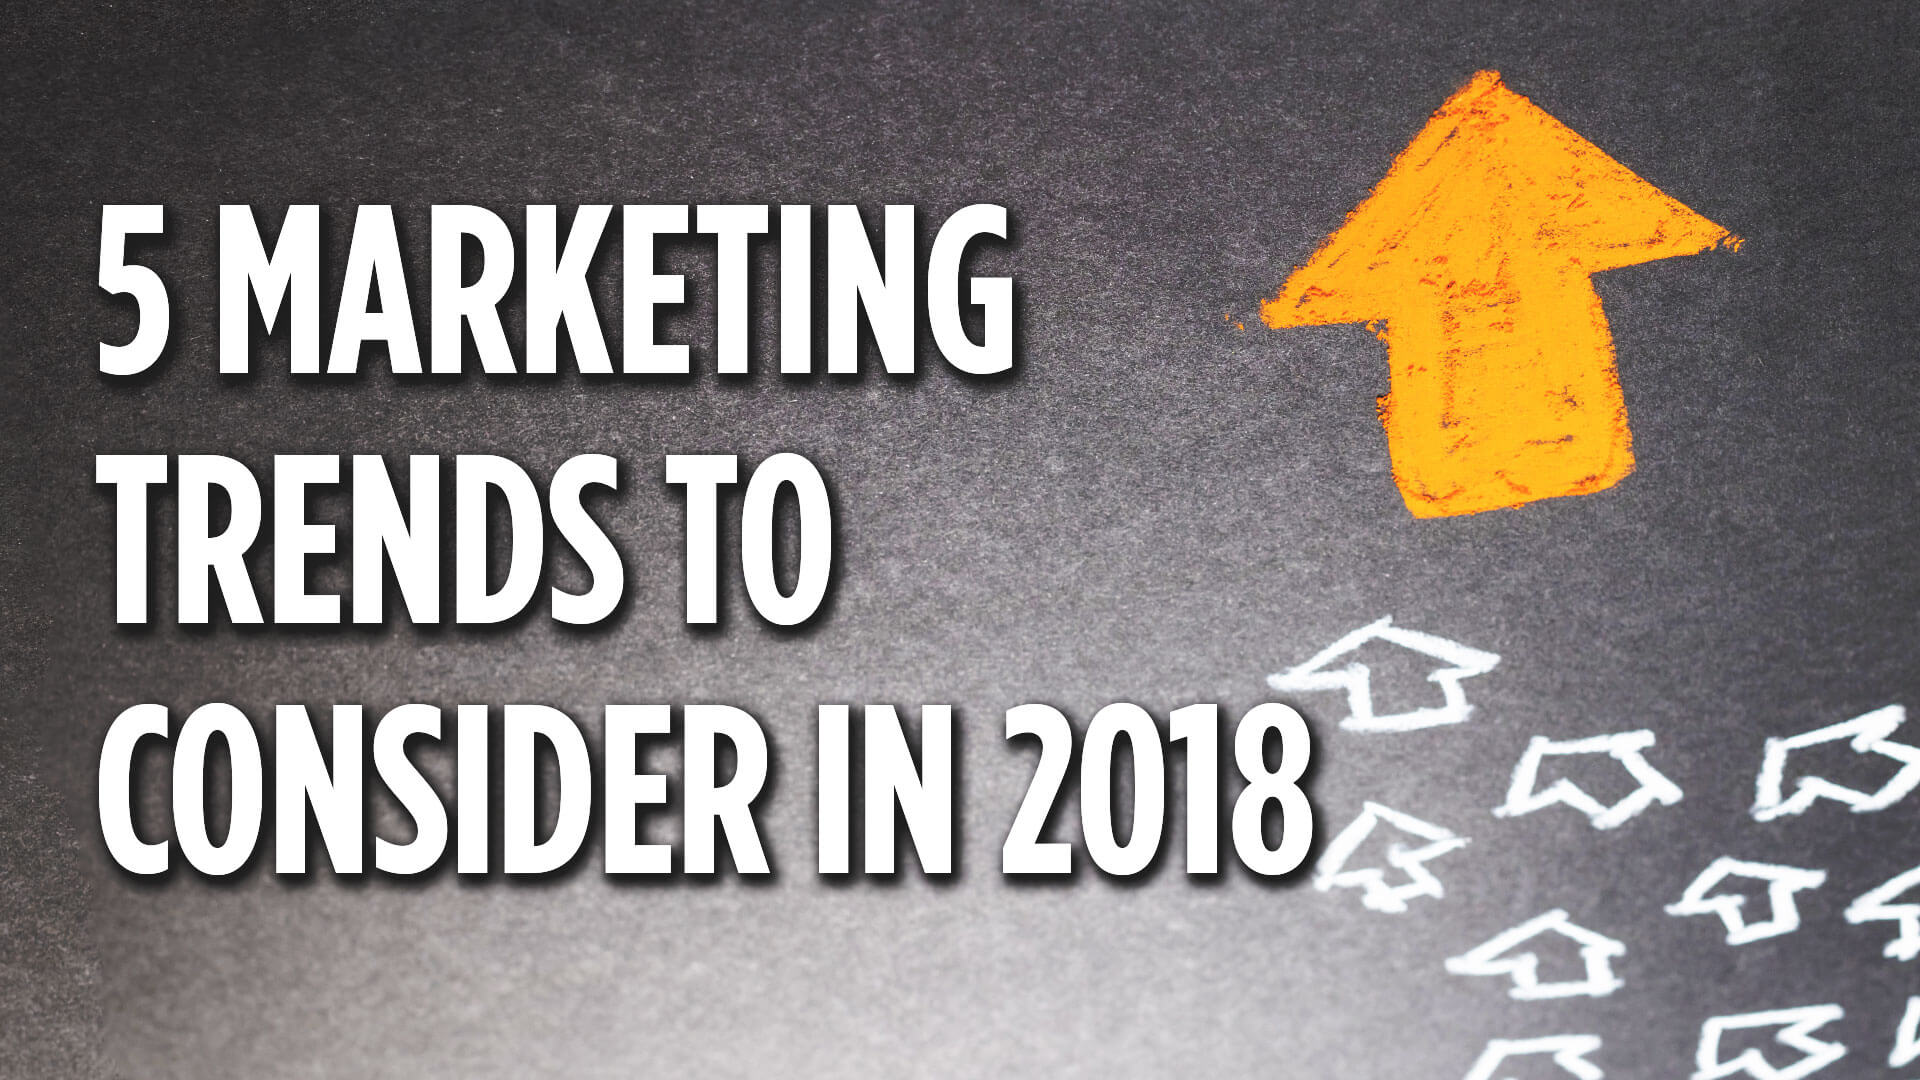 5 Marketing Trends to Consider in 2018